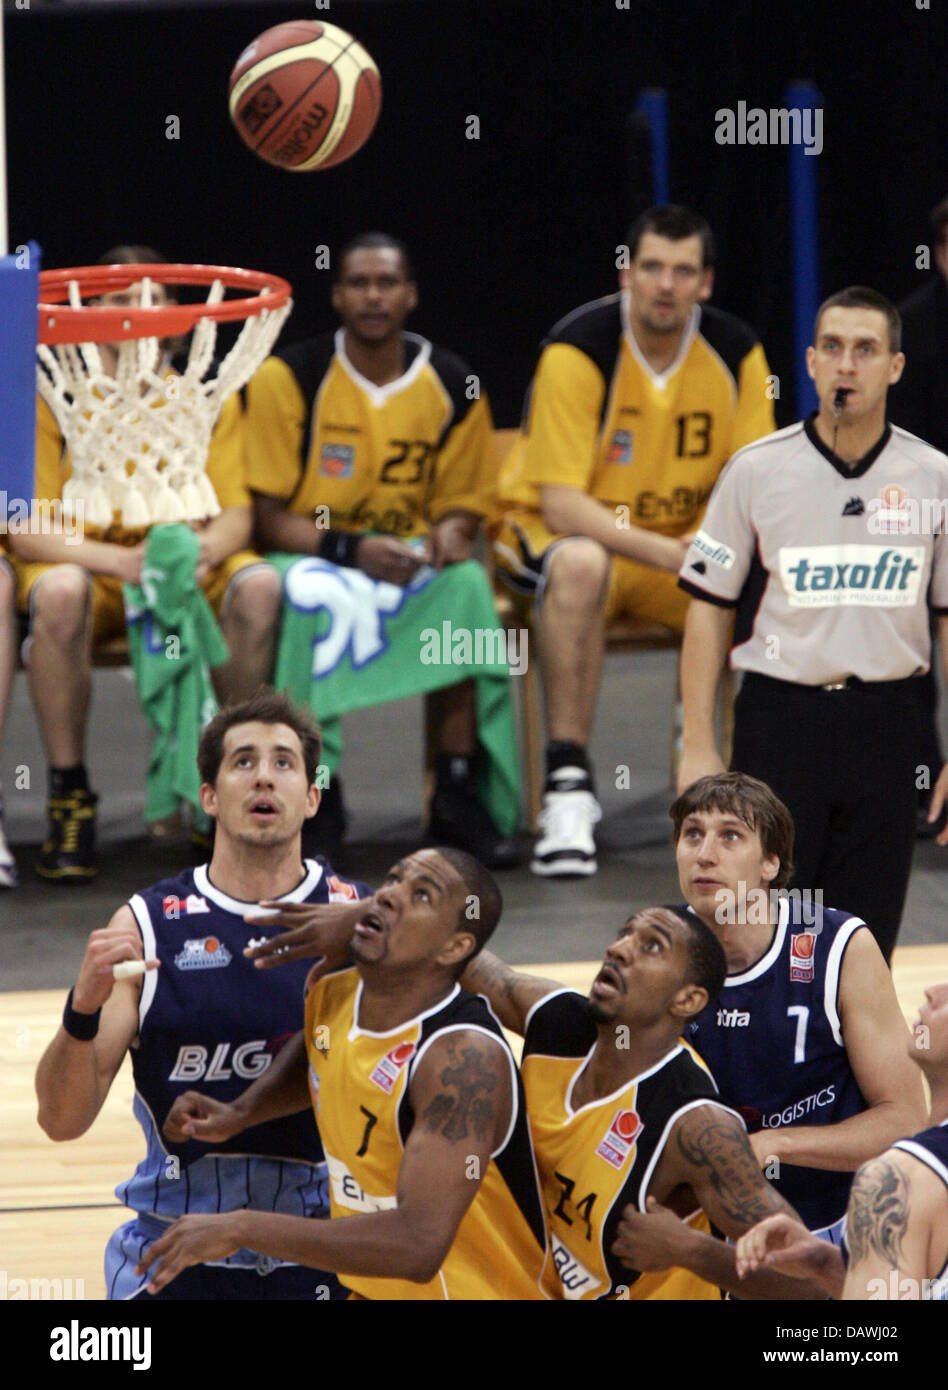 Michel Nascimento (2nd from R) und Jason Dourisseau of Ludwigsburg and Zygimantas Jonusas (R) und Nick Jacobson of Bremerhaven watch the ball in the Color Line Arena in Hamburg, Germany, 29 April 2007. The teams played each other for the third place in the Basketball Bundesliga Cup. Photo: Ulrich Perrey Stock Photo